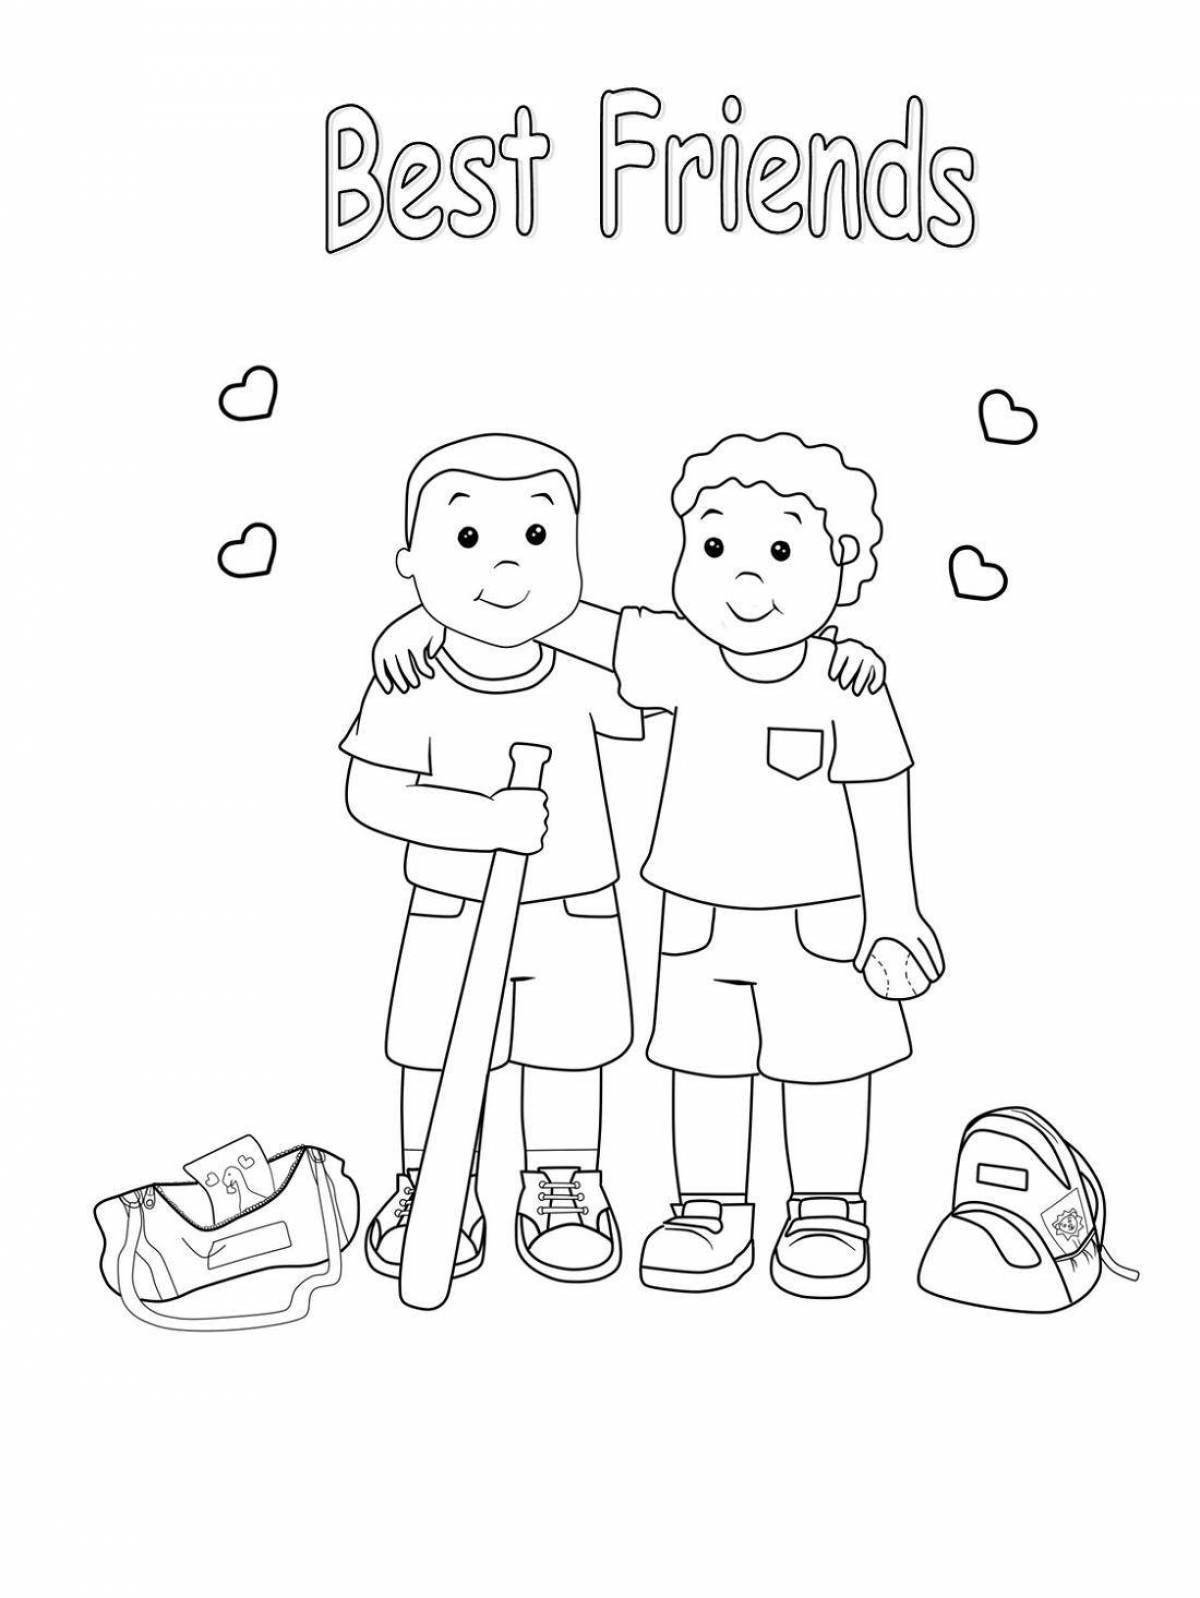 Amusing coloring of friends for children